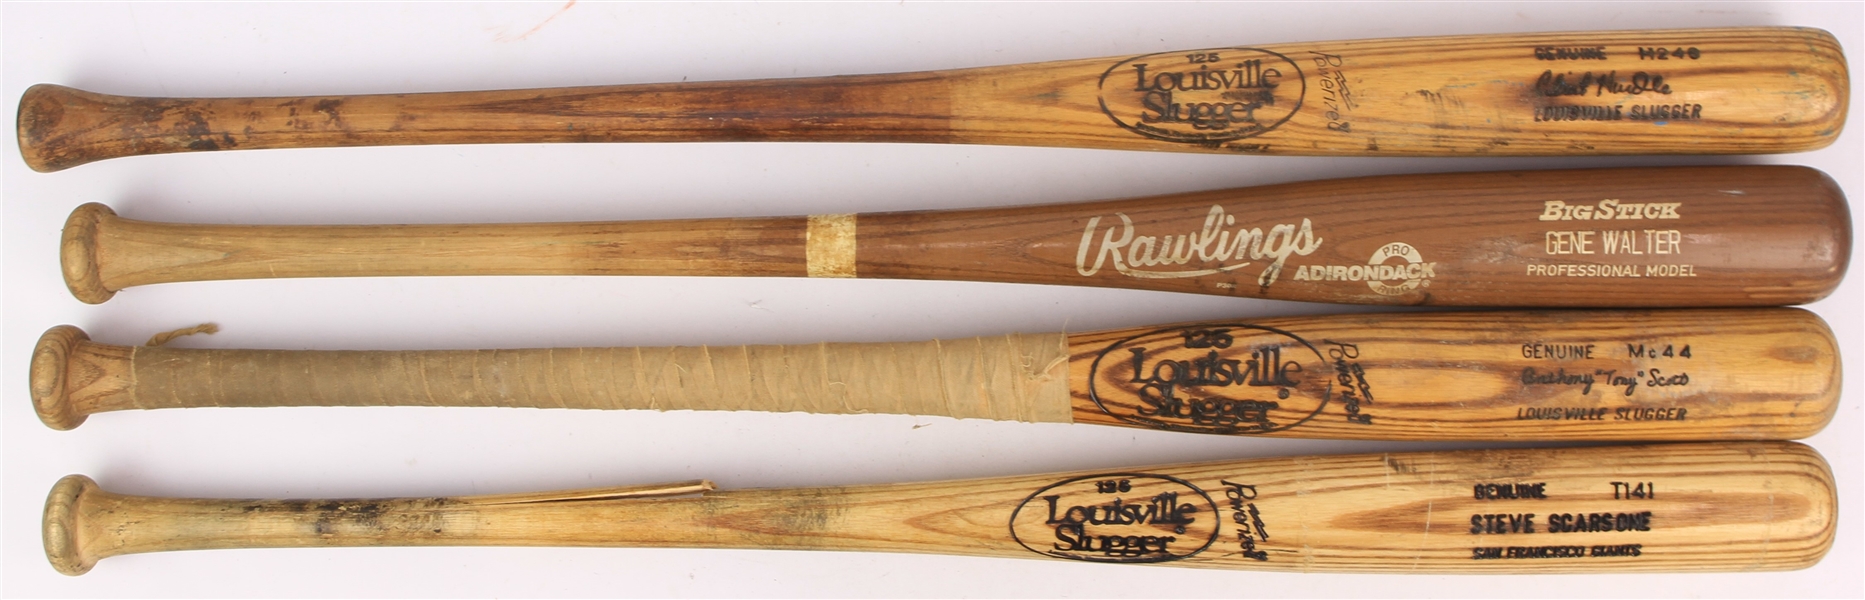 1980s-90s Professional Model Game Used Bat Collection - Lot of 4 w/ Clint Hurdle, Tony Scott, Gene Walter & More (MEARS LOA/Mets Employee LOA)